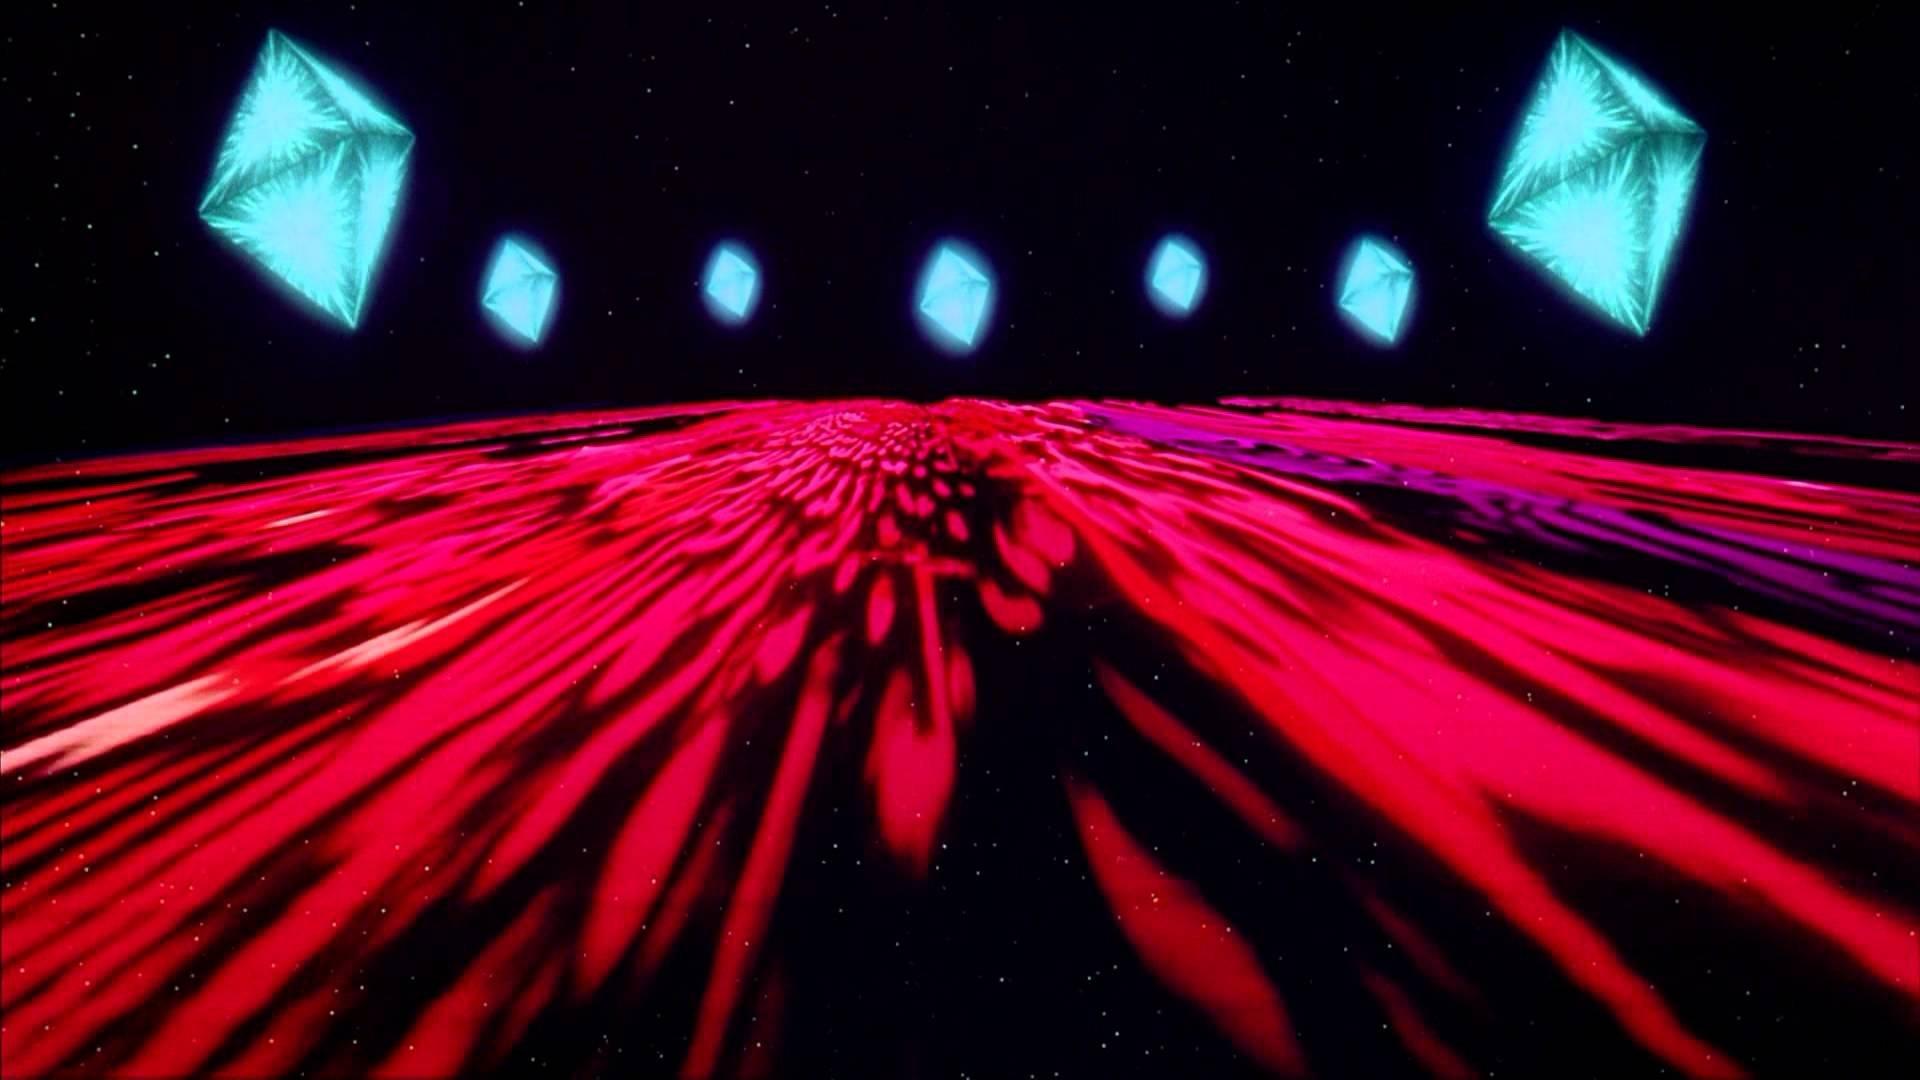 2001: A Space Odyssey Wallpaper and Background Image